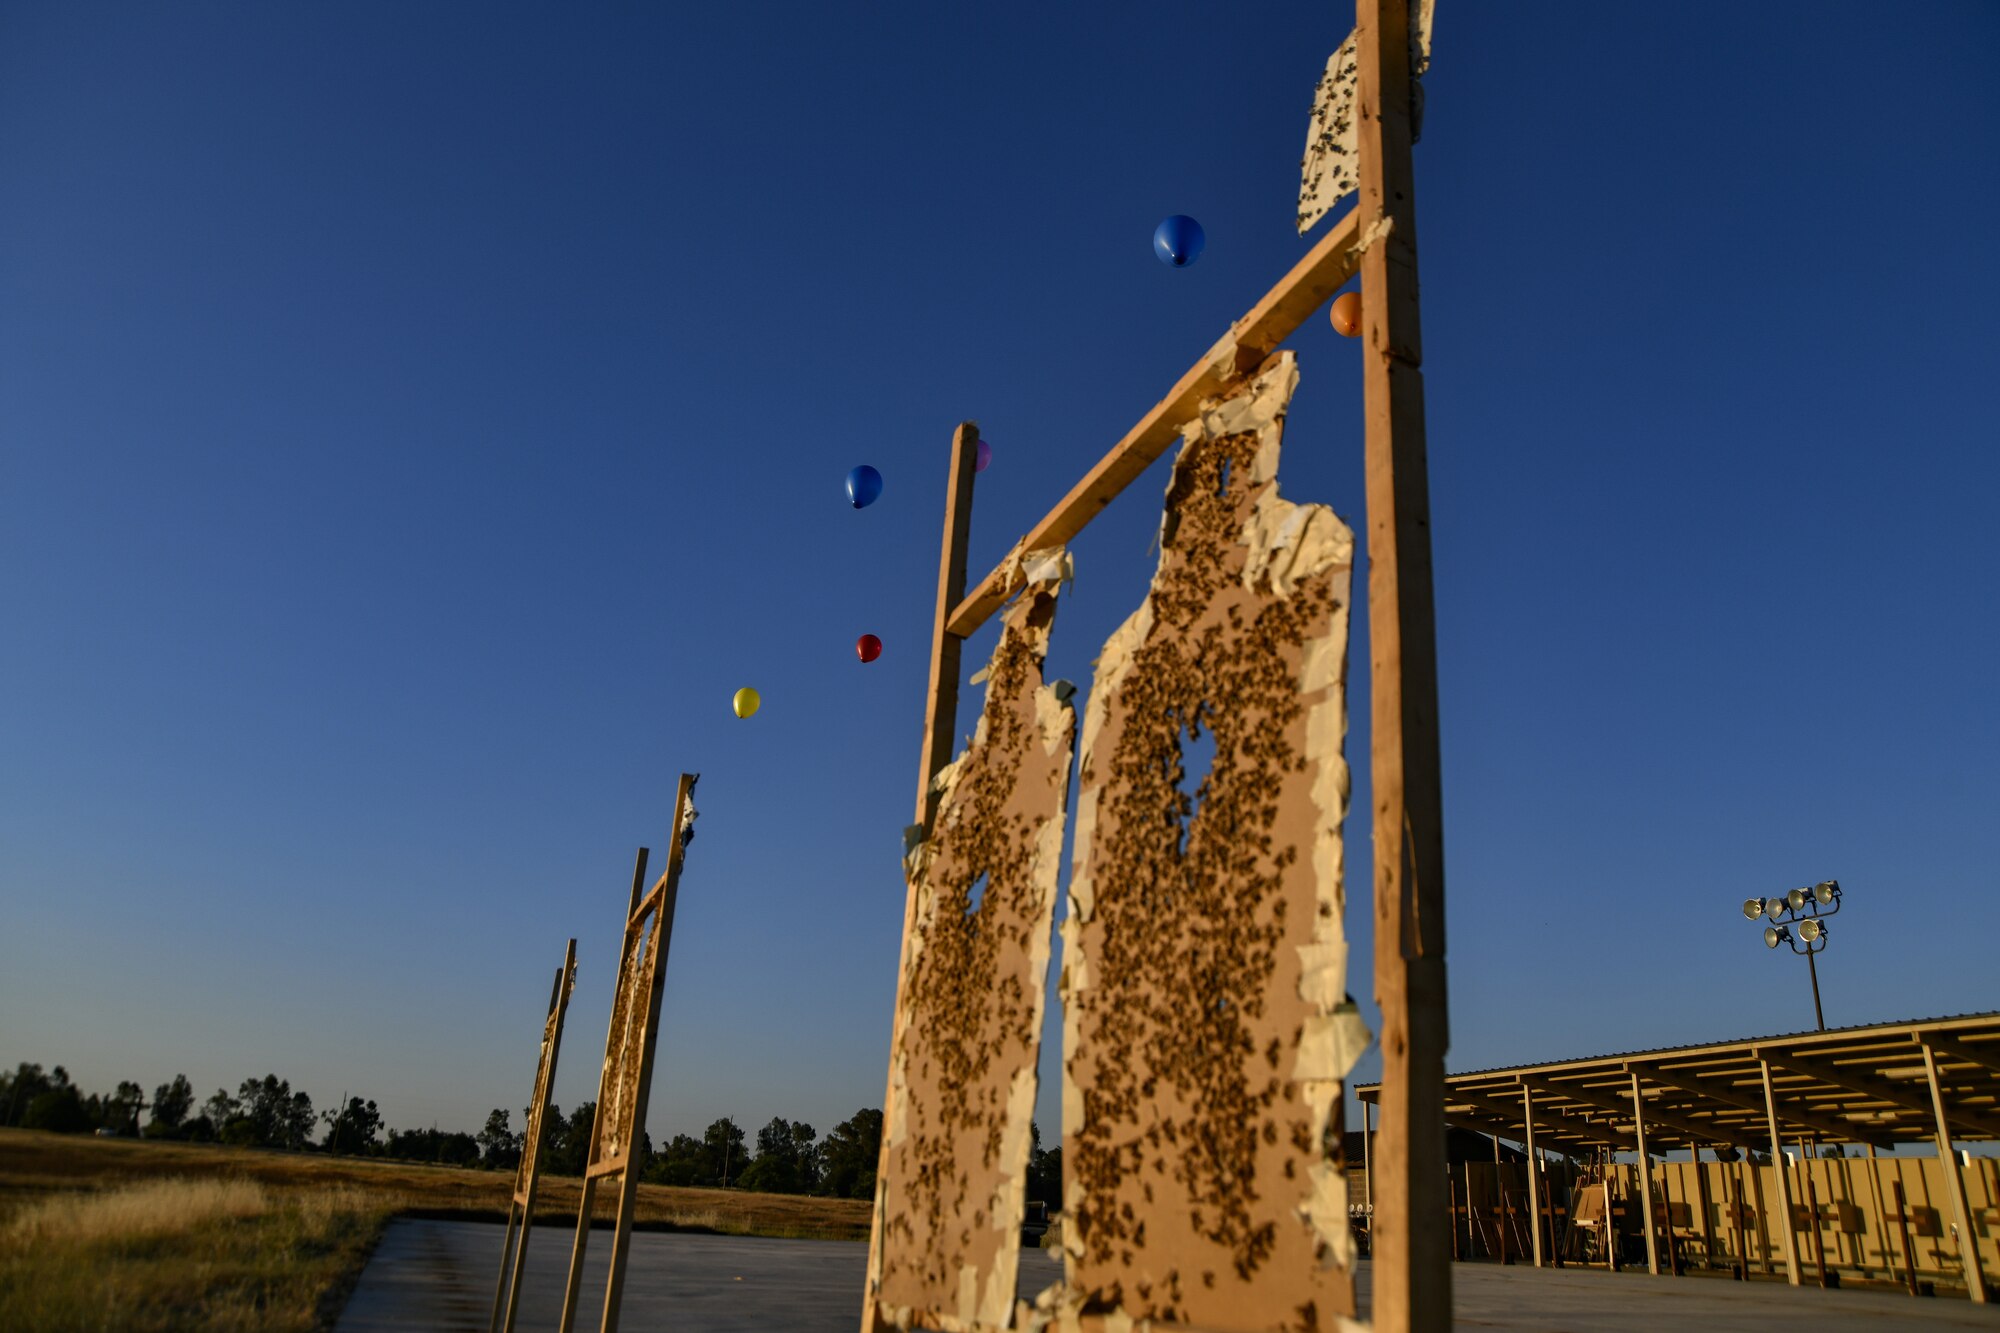 Several helium balloons float above targets at the 9th Security Forces Squadron firing range prior to a demonstration of the Smart Shooter sighting device at Beale Air Force Base, California, Aug. 14, 2019. The sighting device attaches to the weapon and locks on then fires to neutralize its target with or without movement. The device is also being used to limit friendly fire as the weapon cannot be fired unless it is purposely locked on. (U.S. Air Force photo by Tech. Sgt. Alexandre Montes)